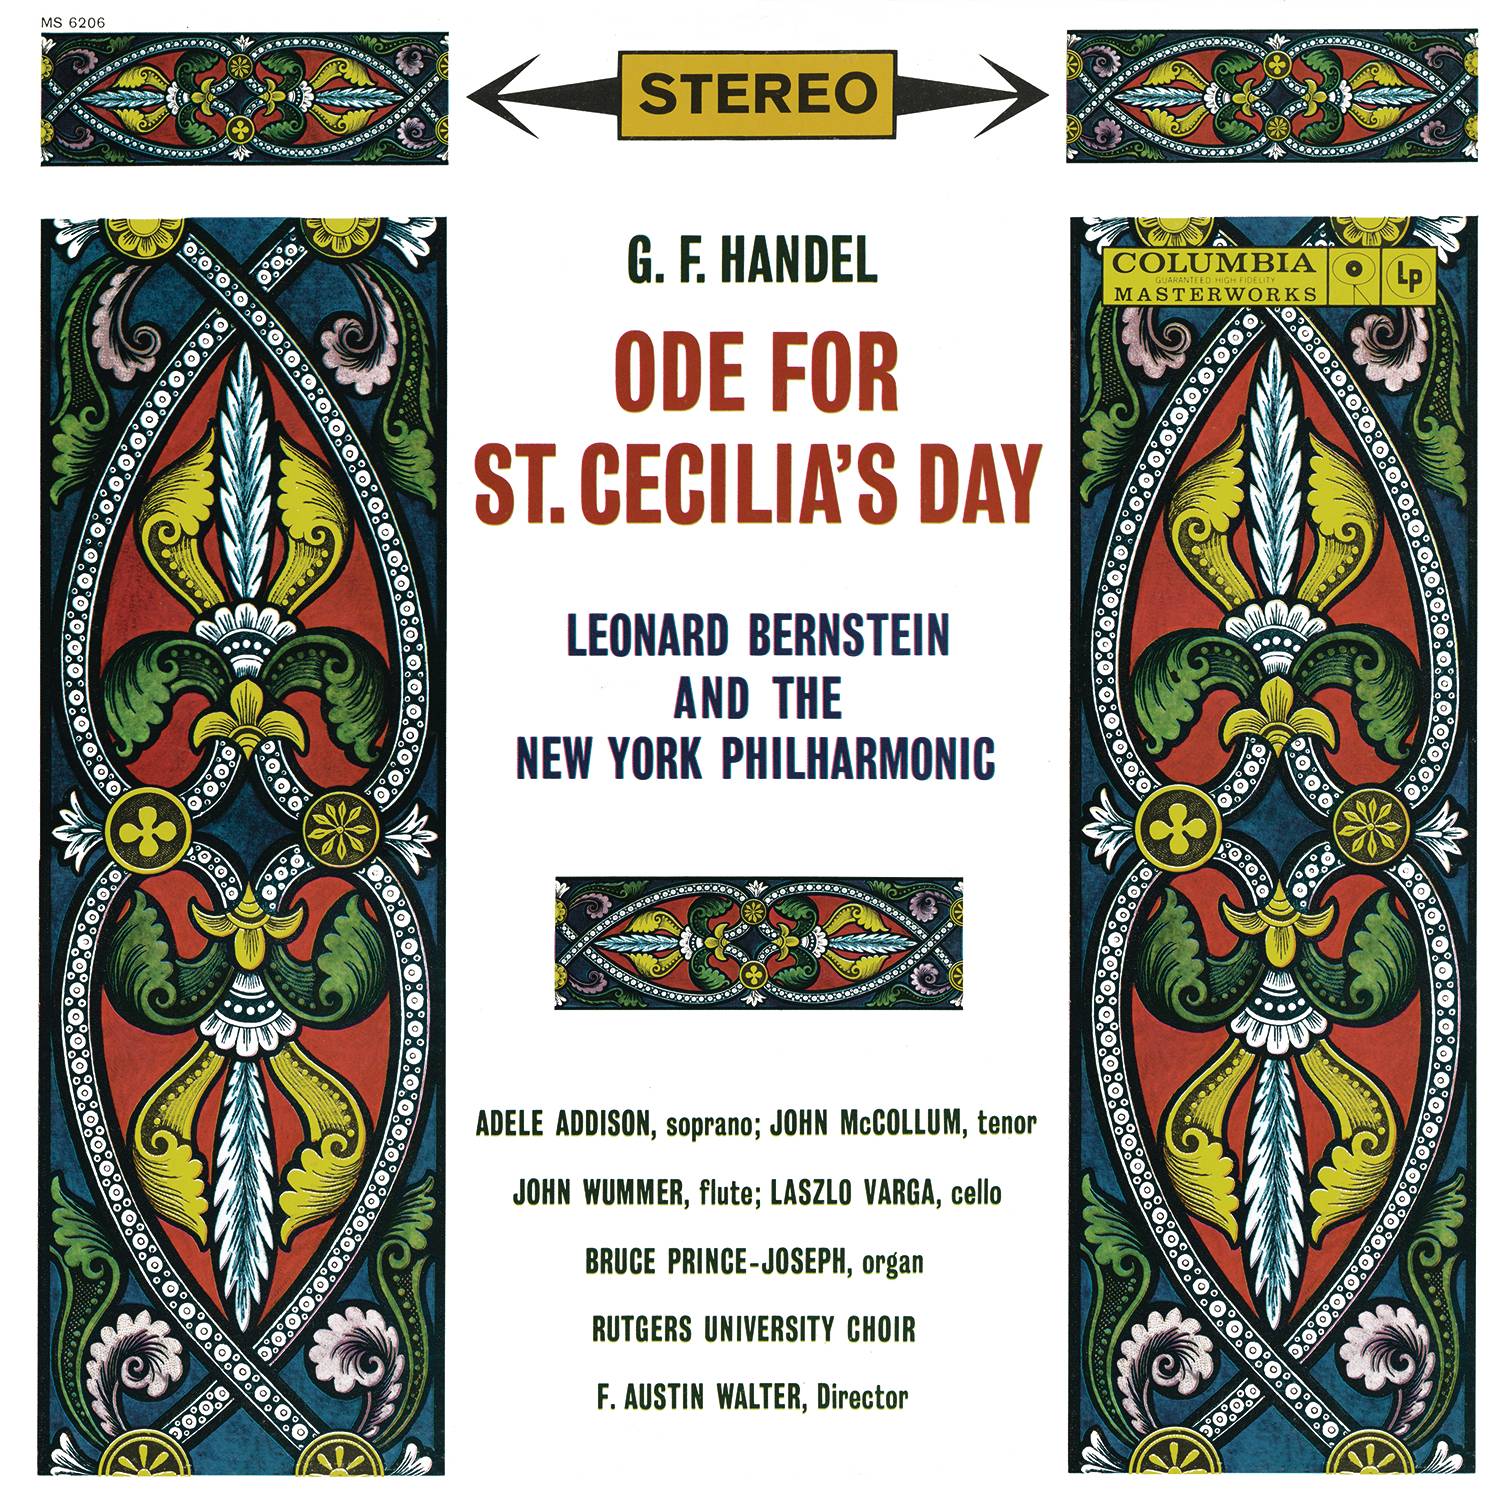 Ode For St. Cecilia's Day, HWV 76:No. 8, But oh! What art can teach (Aria)